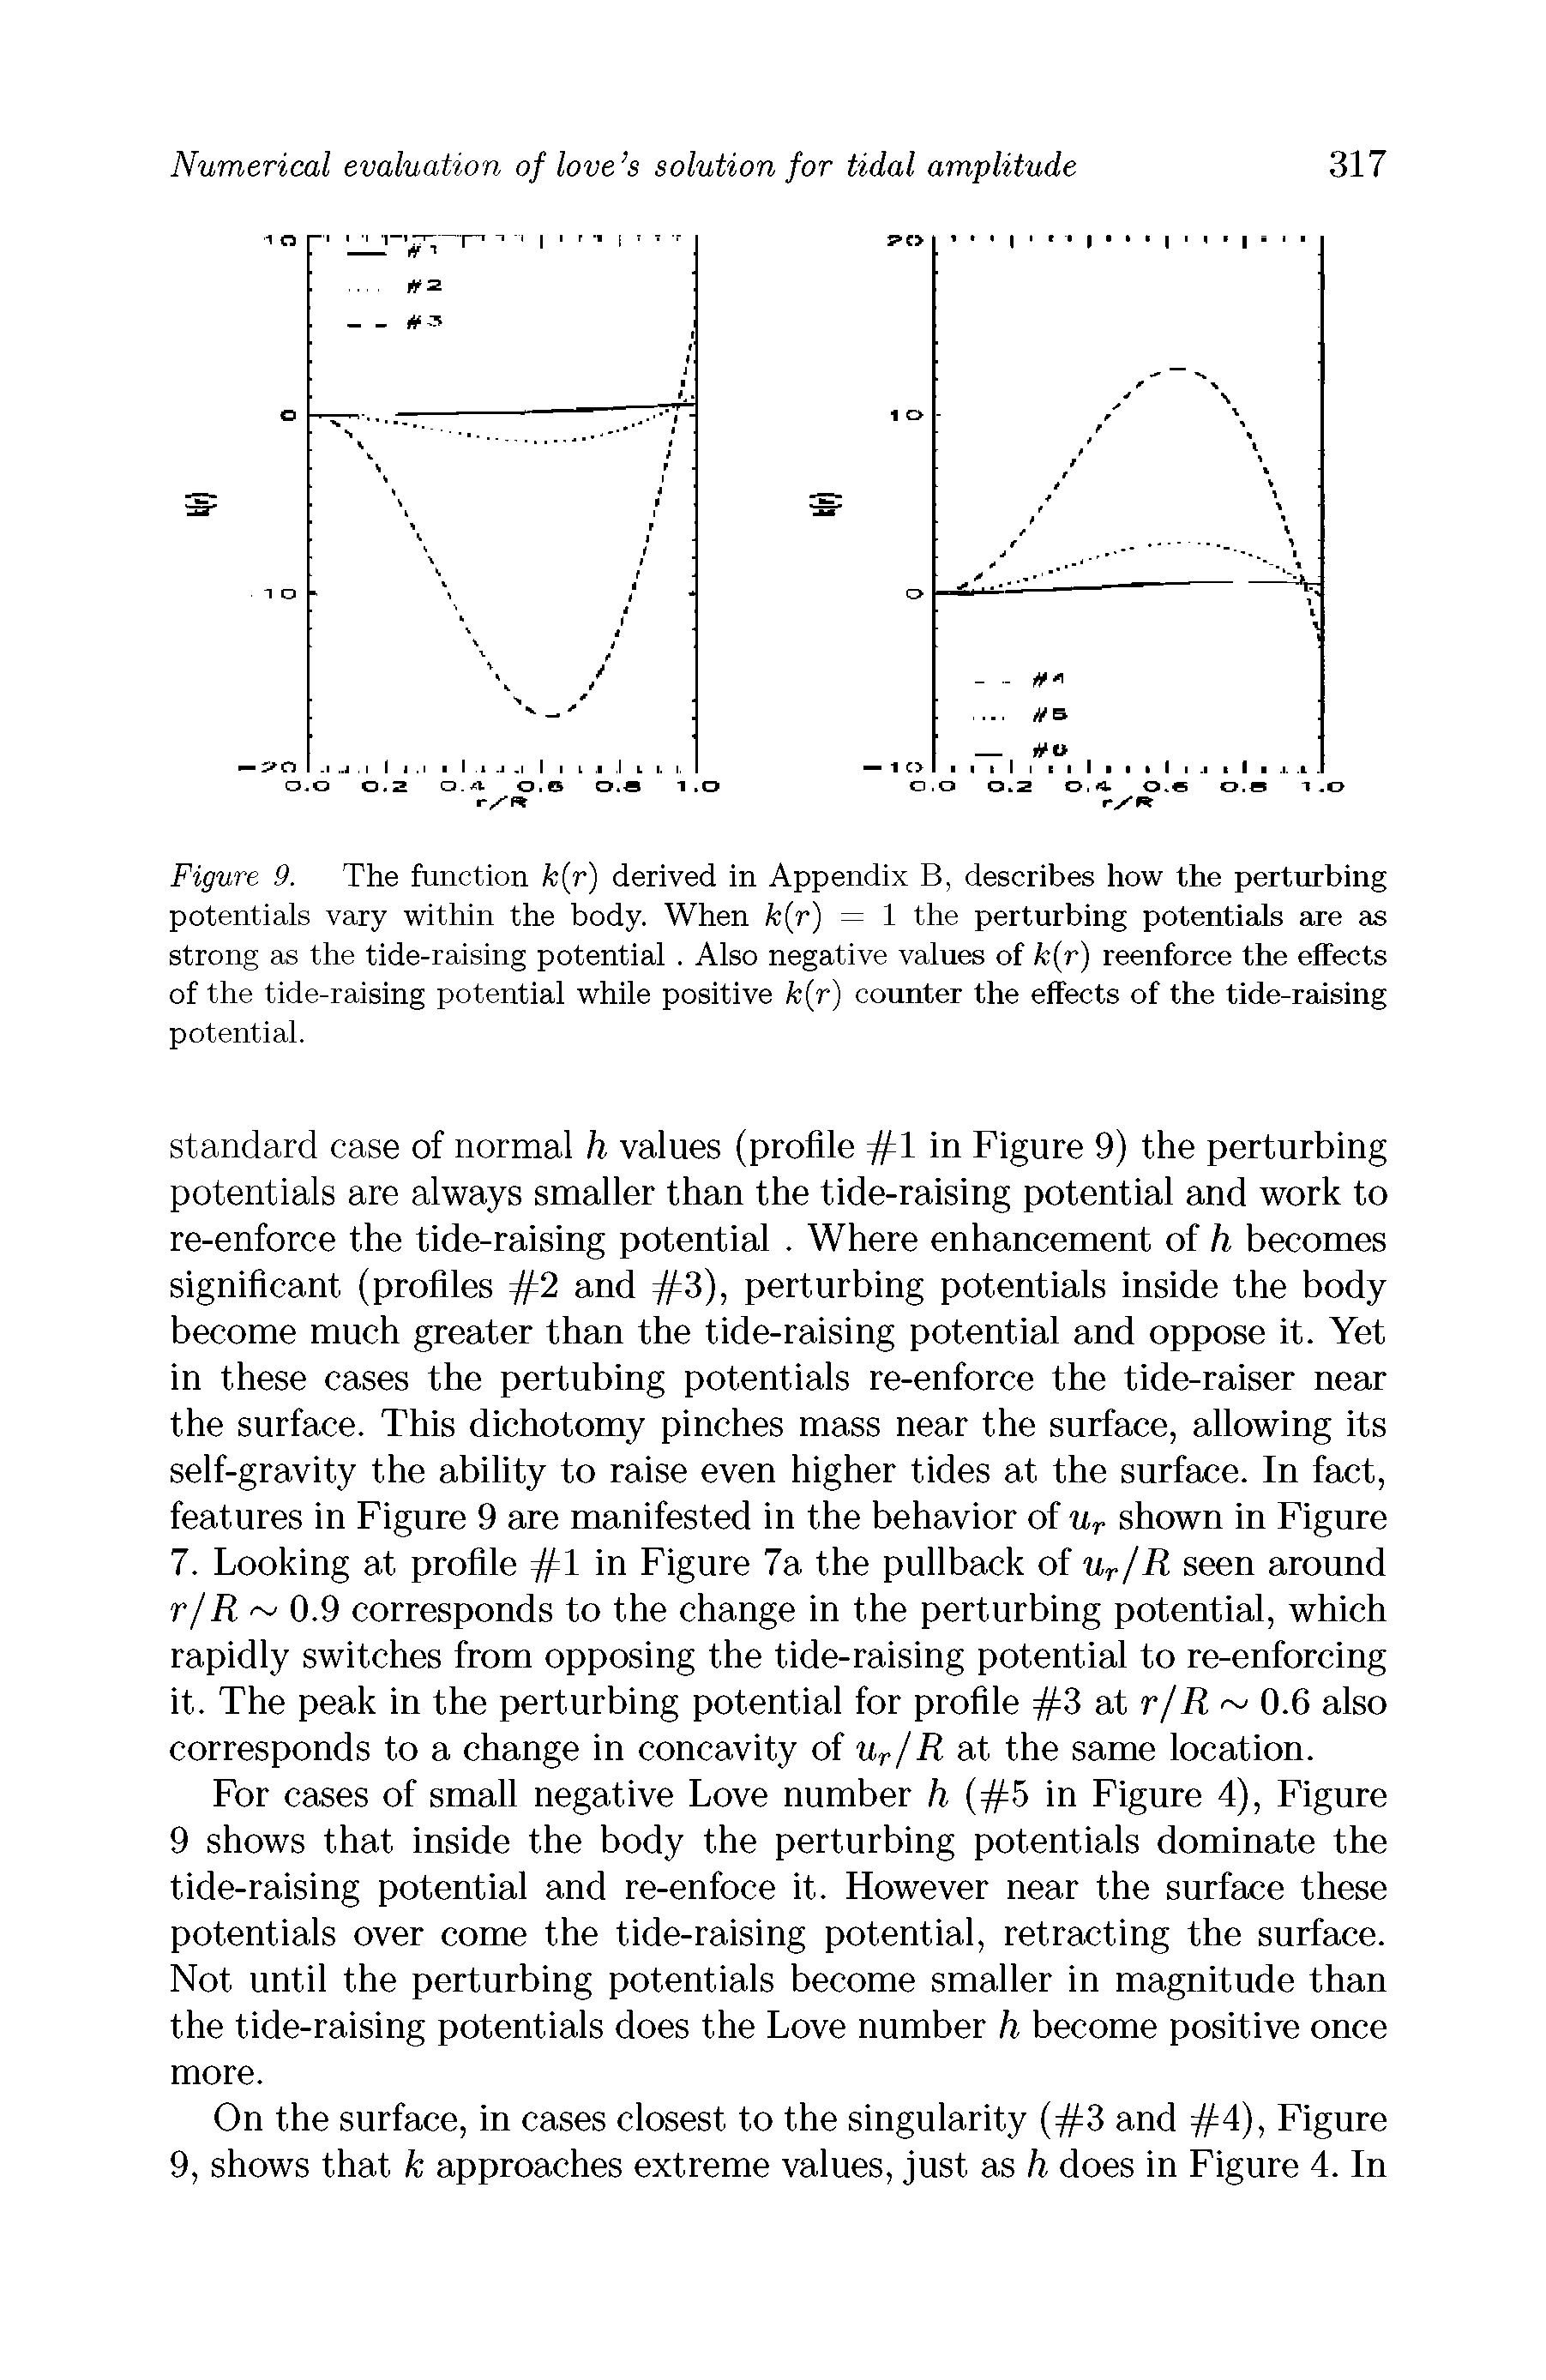 Figure 9. The function k(r) derived in Appendix B, describes how the perturbing potentials vary within the body. When k(r) = 1 the perturbing potentials are as strong as the tide-raising potential. Also negative values of k(r) reenforce the effects of the tide-raising potential while positive k(r) counter the effects of the tide-raising potential.